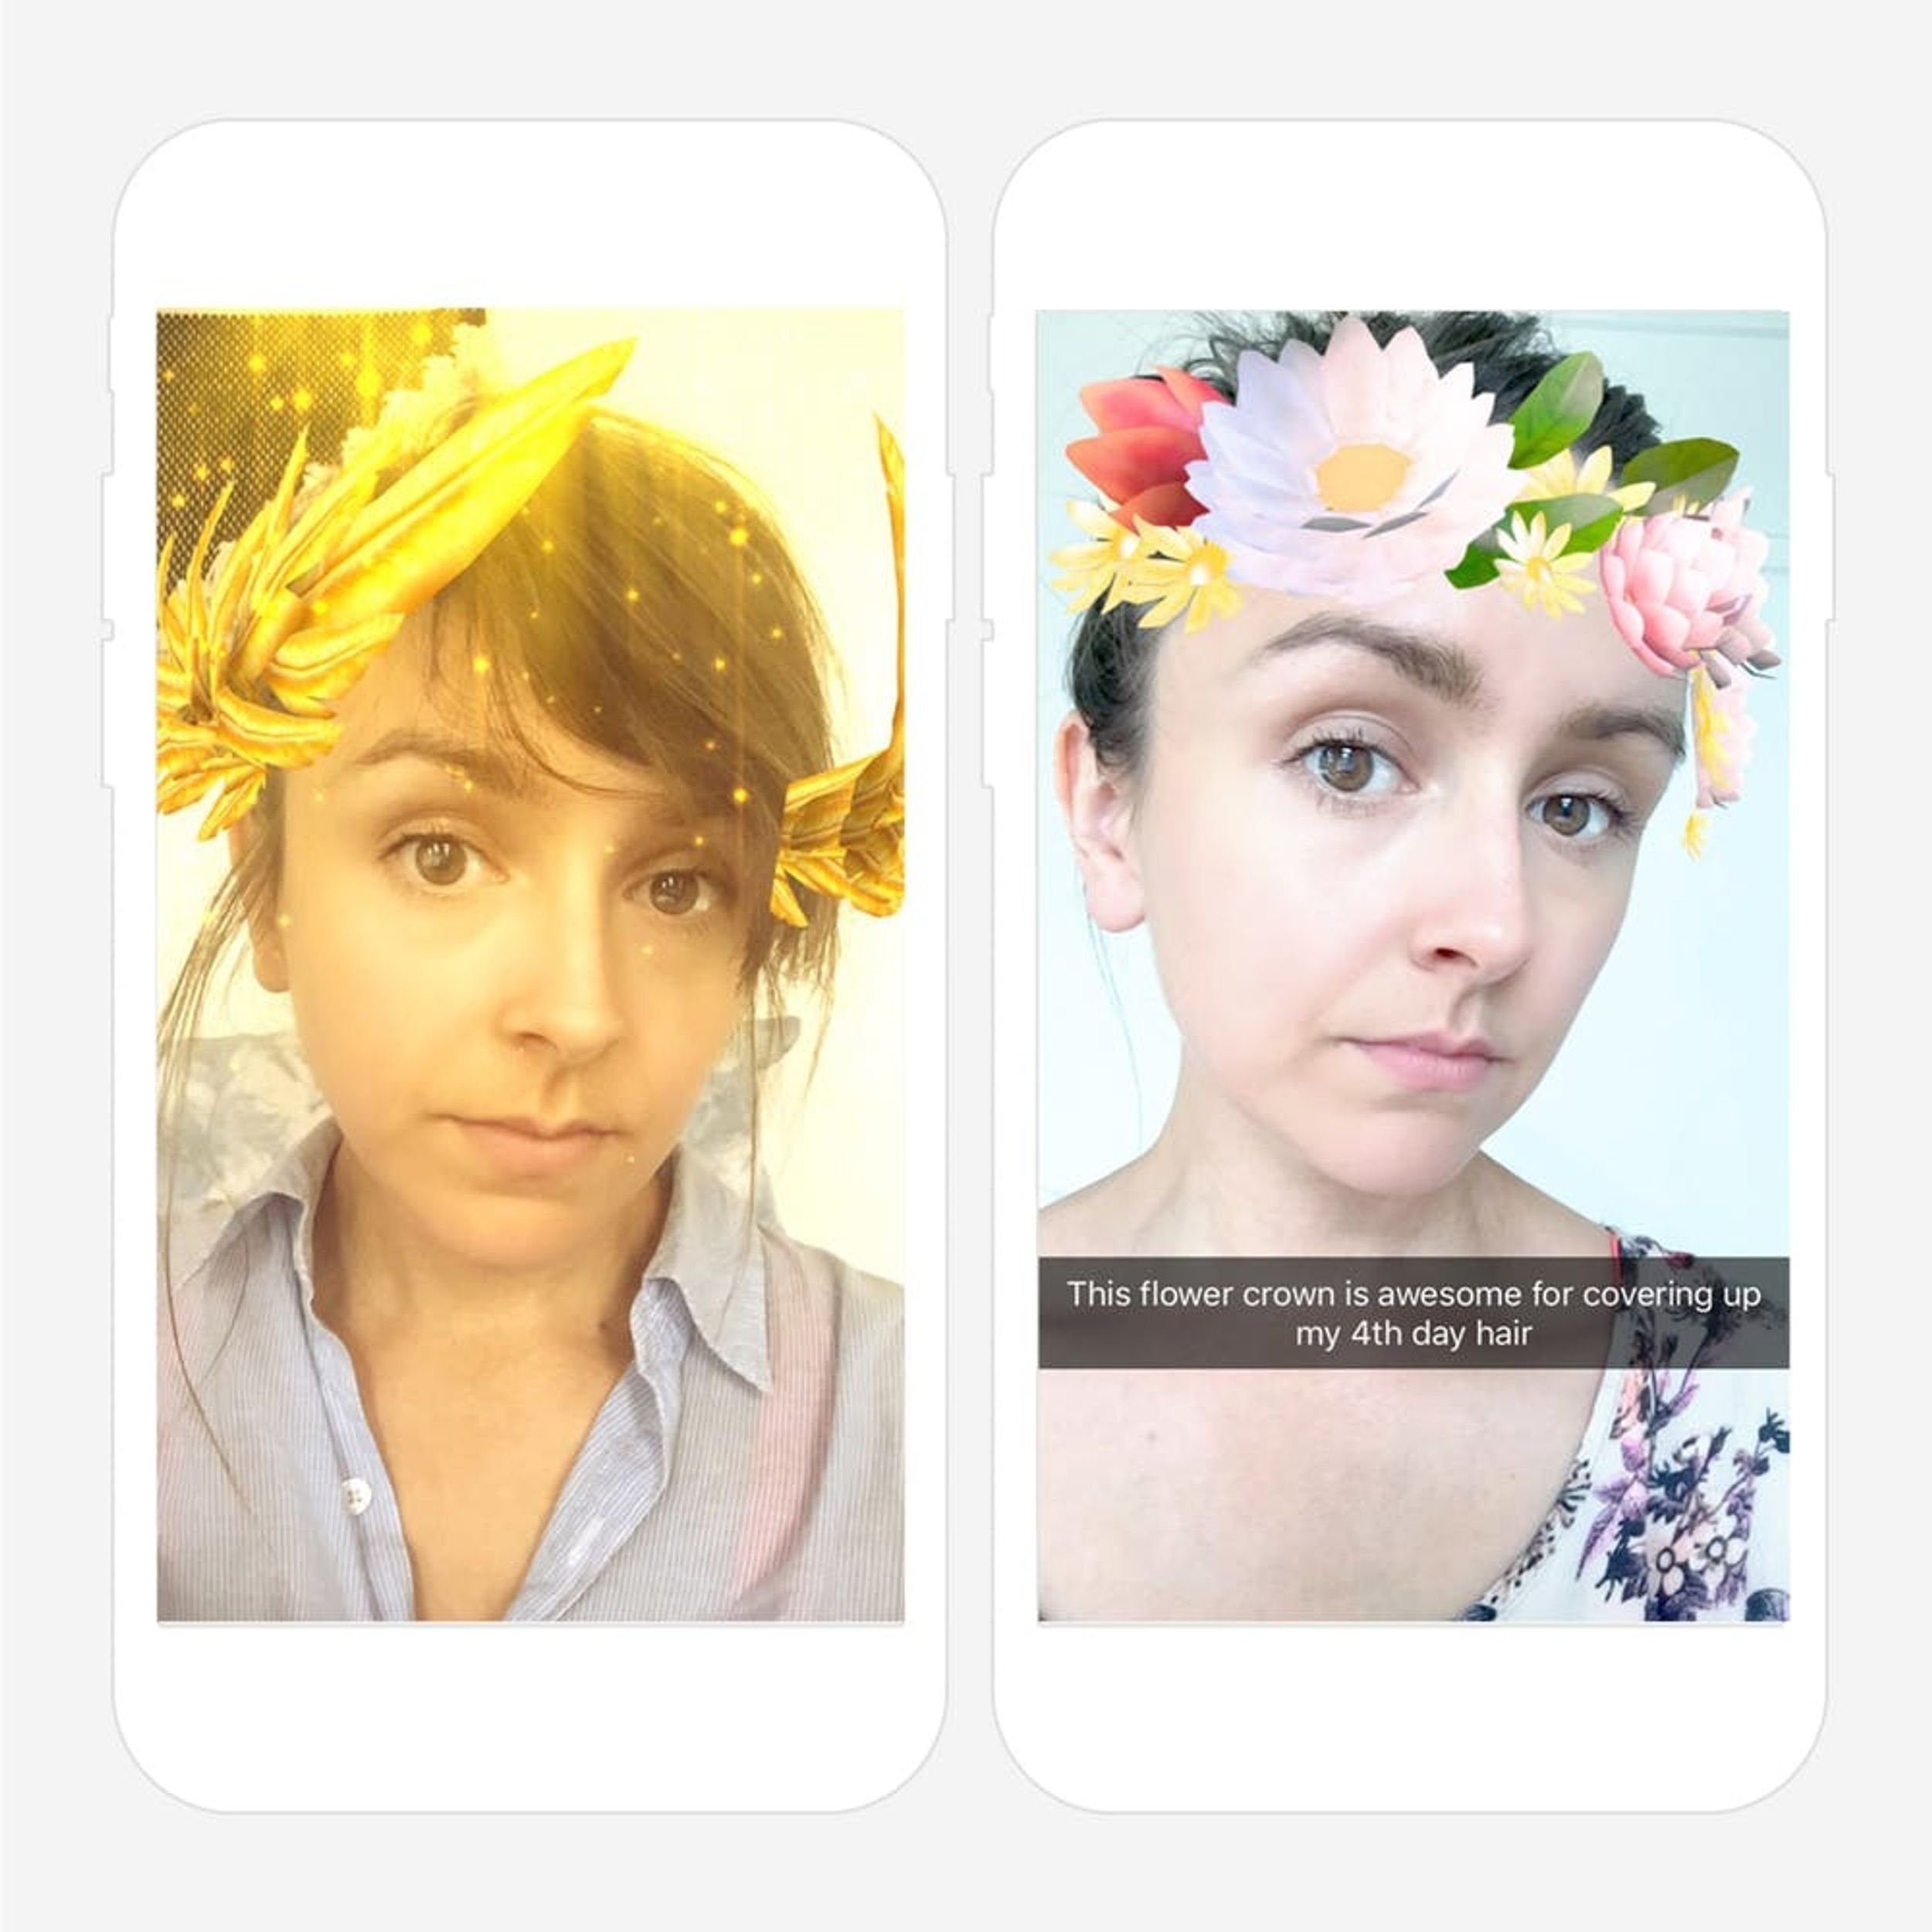 I’m 33 and Finally Joined Snapchat. Here’s What Happened